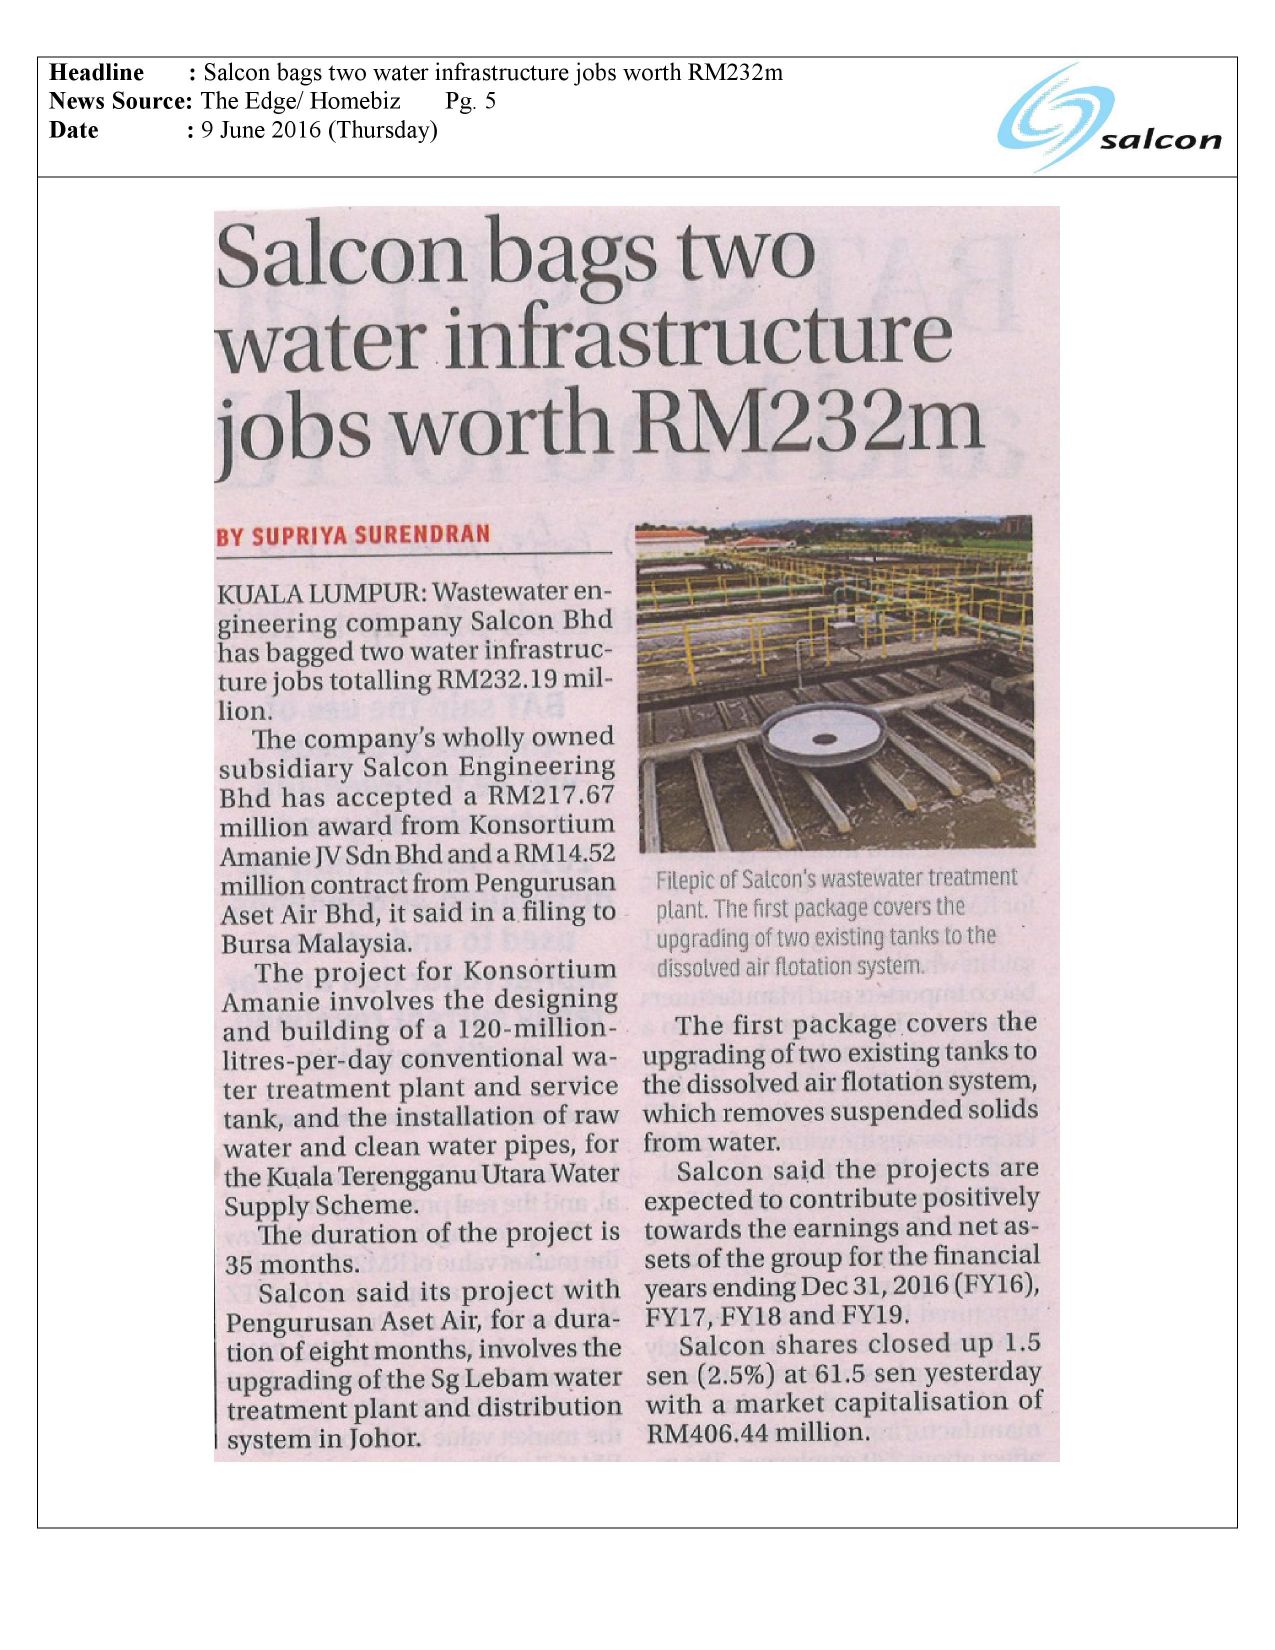 Salcon bags two water infrastructure jobs worth RM232m